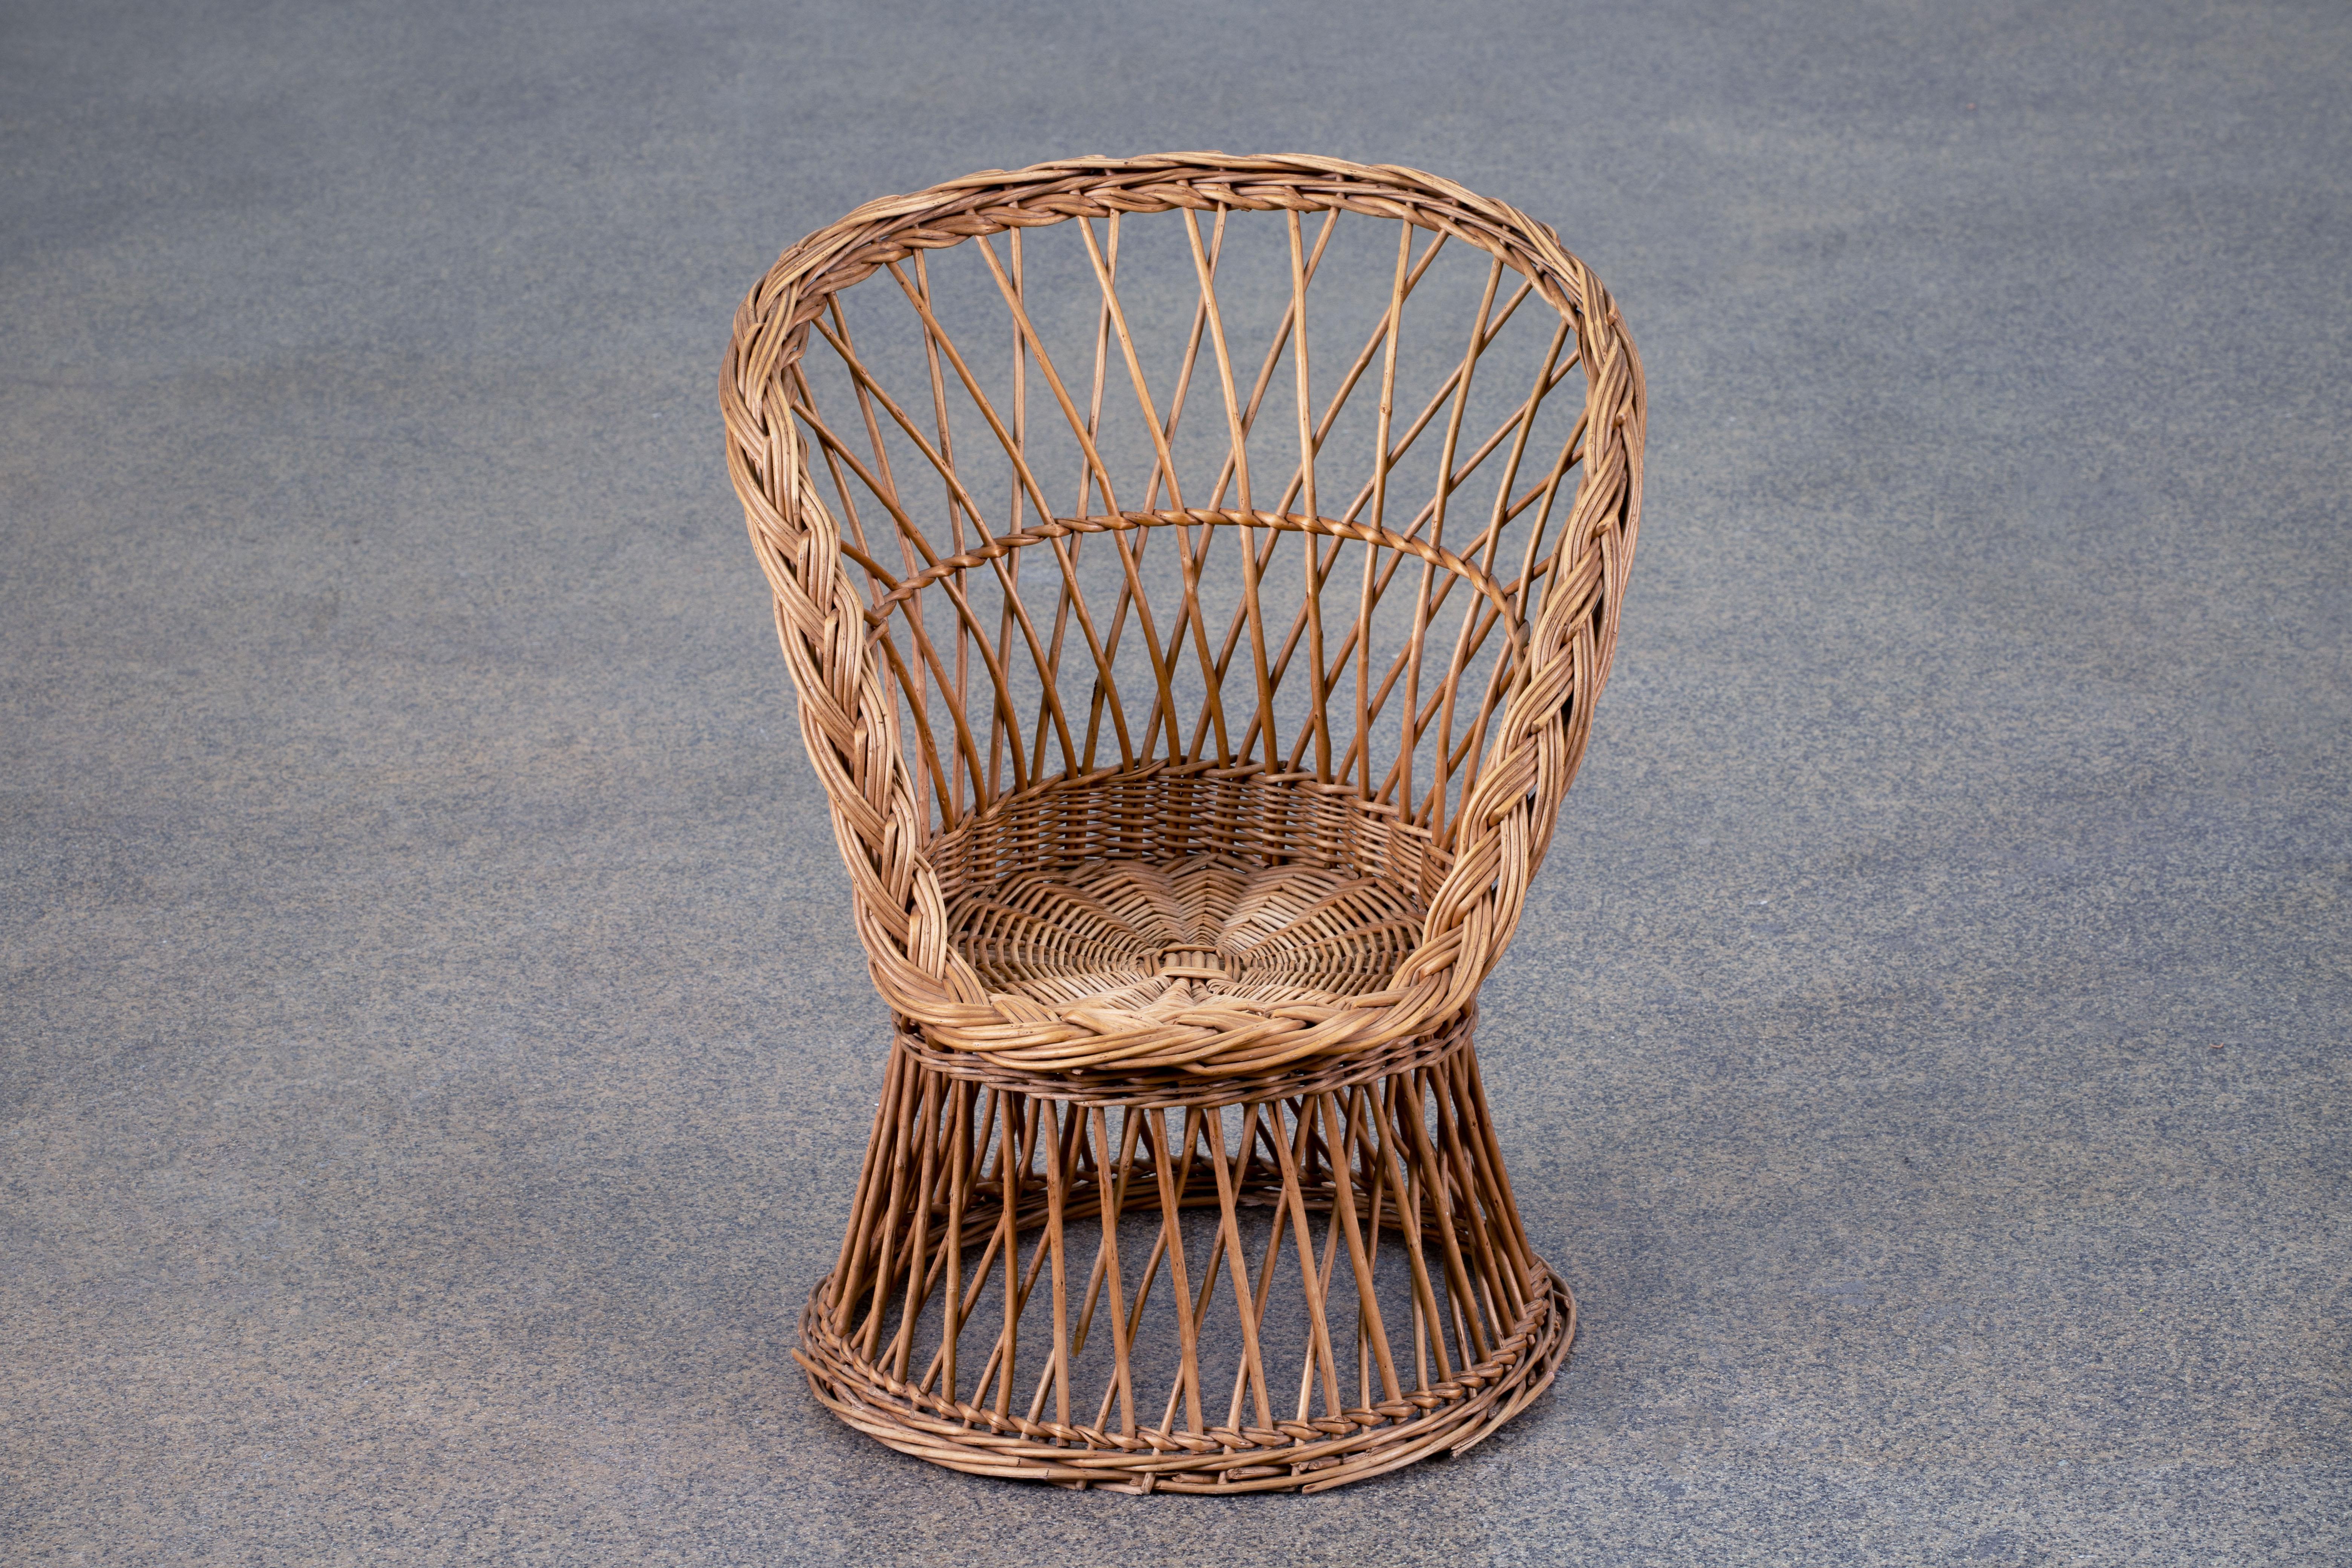 French Riviera Organic Handcrafted Children rattan chair, 1960s, France.

Super chic children's chair, to be placed anywhere the kids hang out so they can have their own space. Lovely condition, new leather seat.

In the style of Franco Albini,